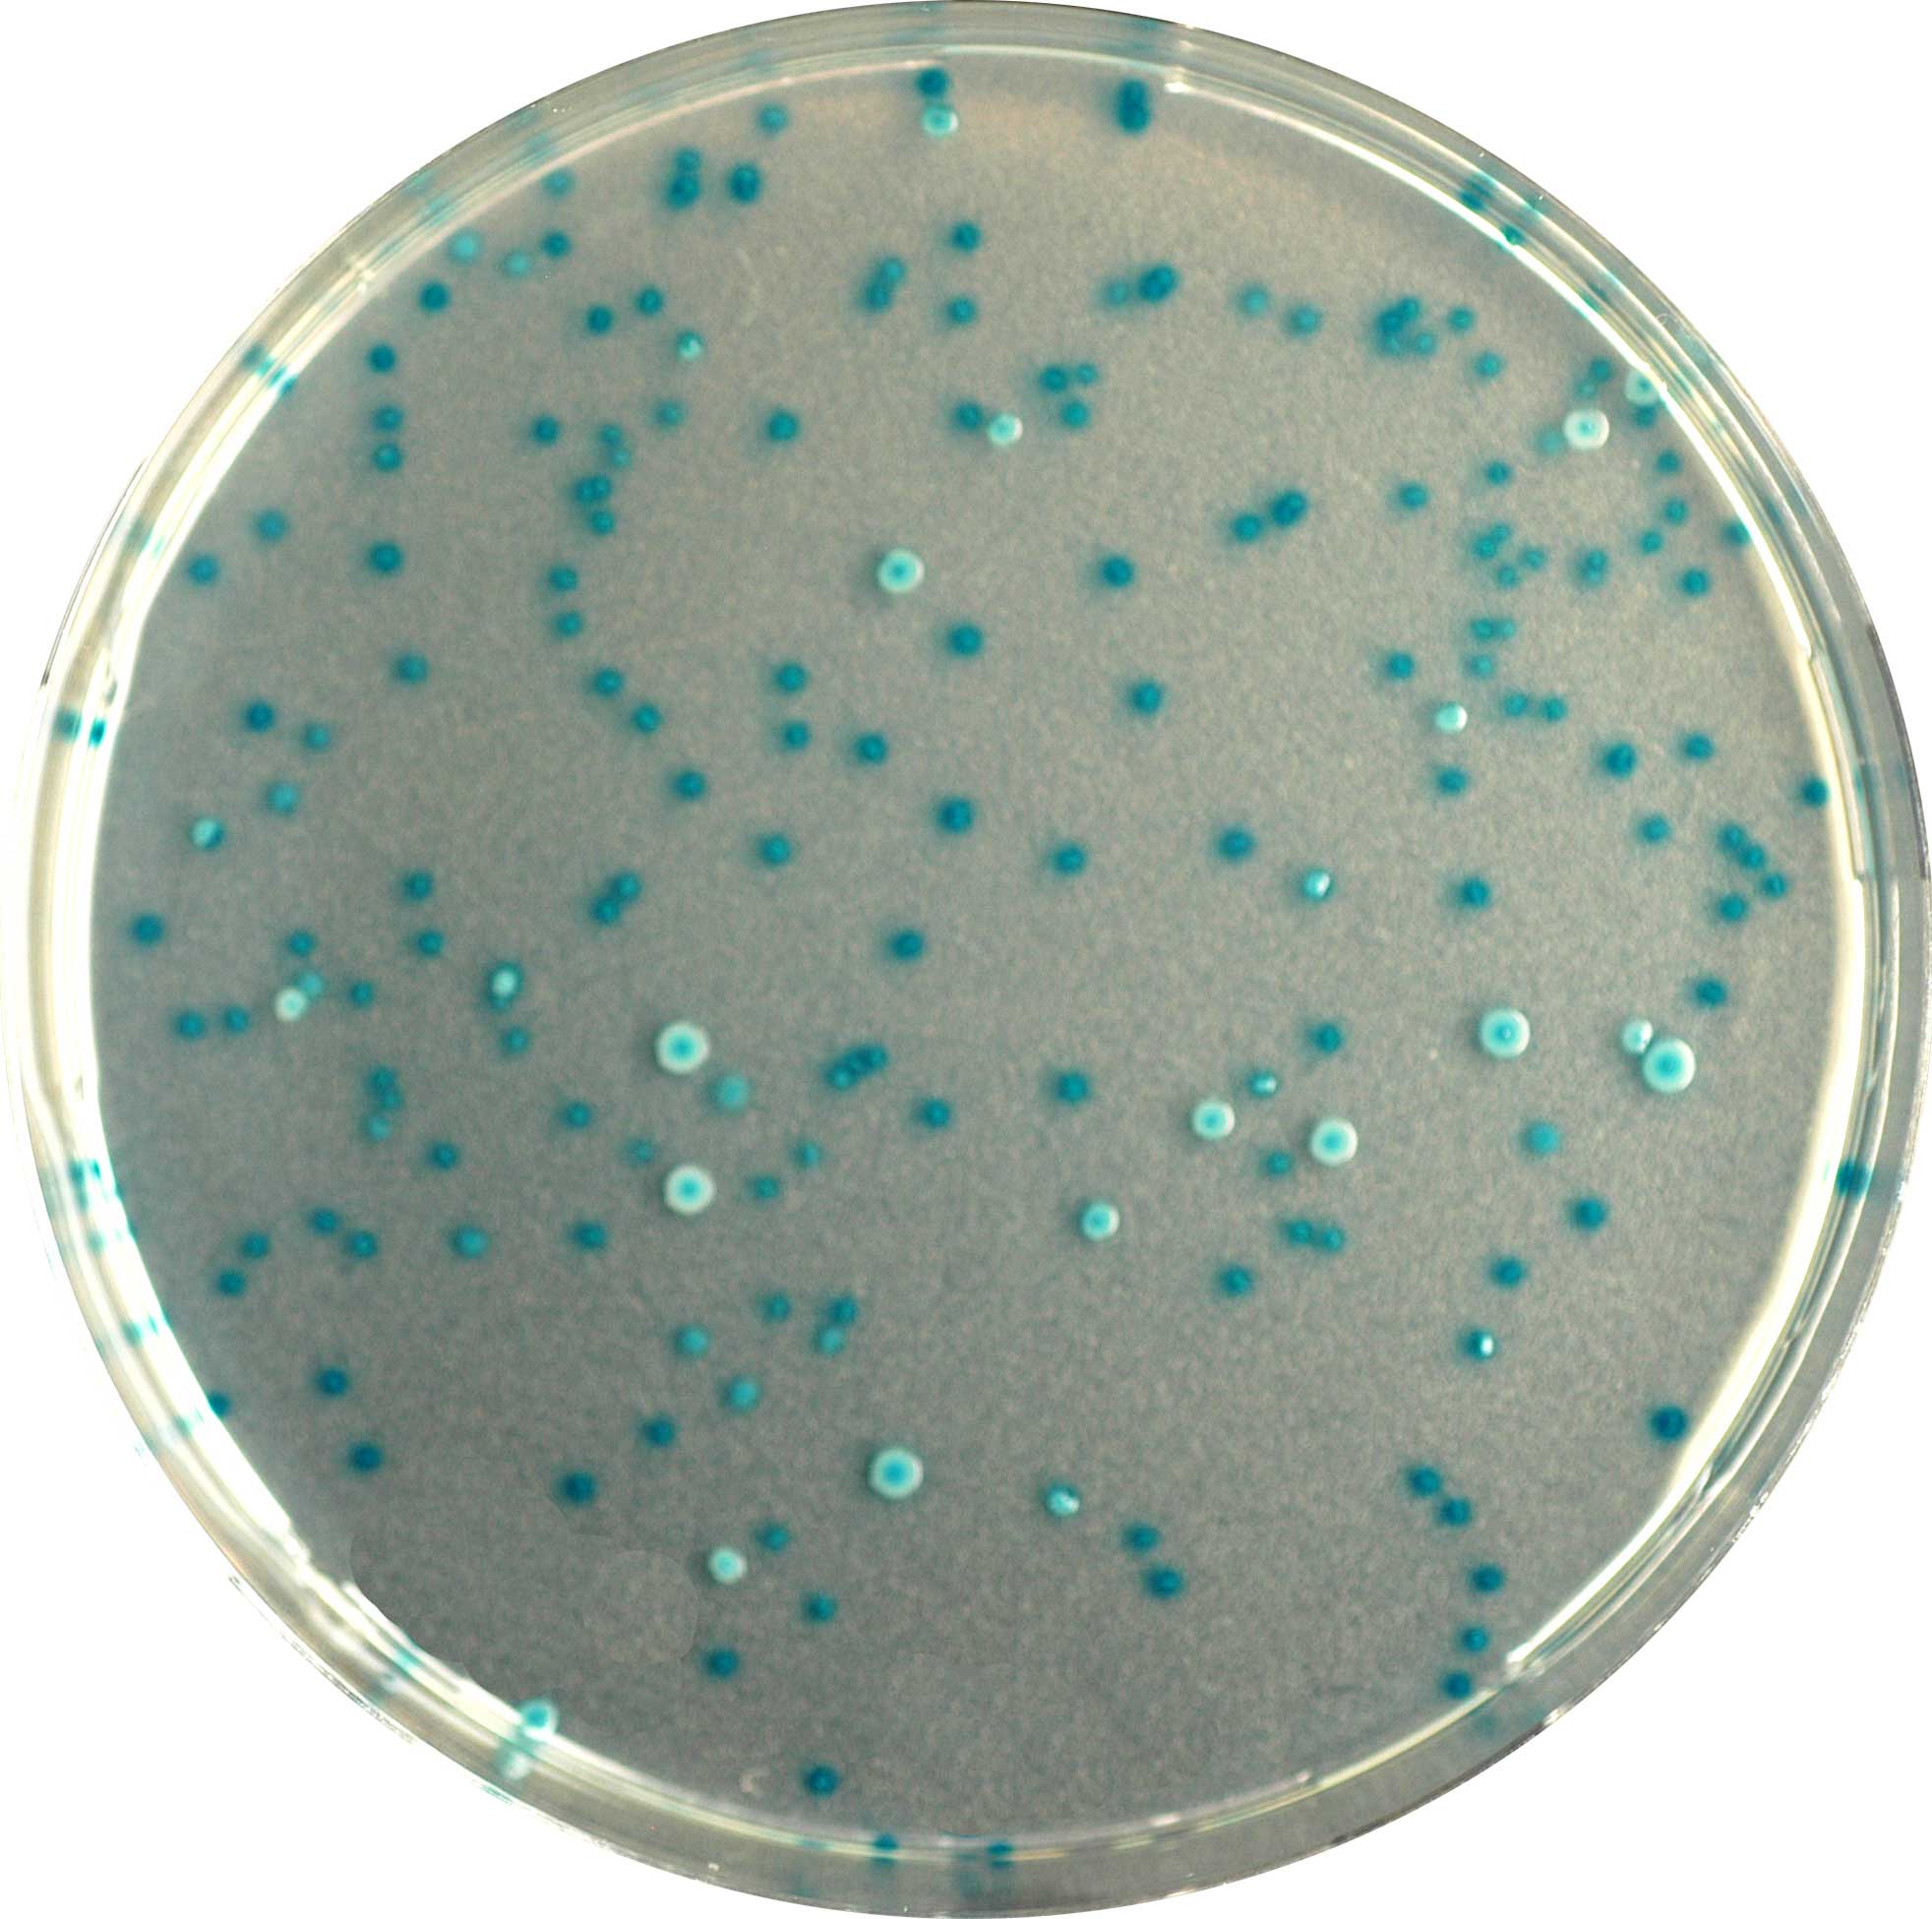 CHROMagar™ E.coli. Chromogenic medium for detection and enumeration of ß-glucuronidase positive E.coli in food and water samples.